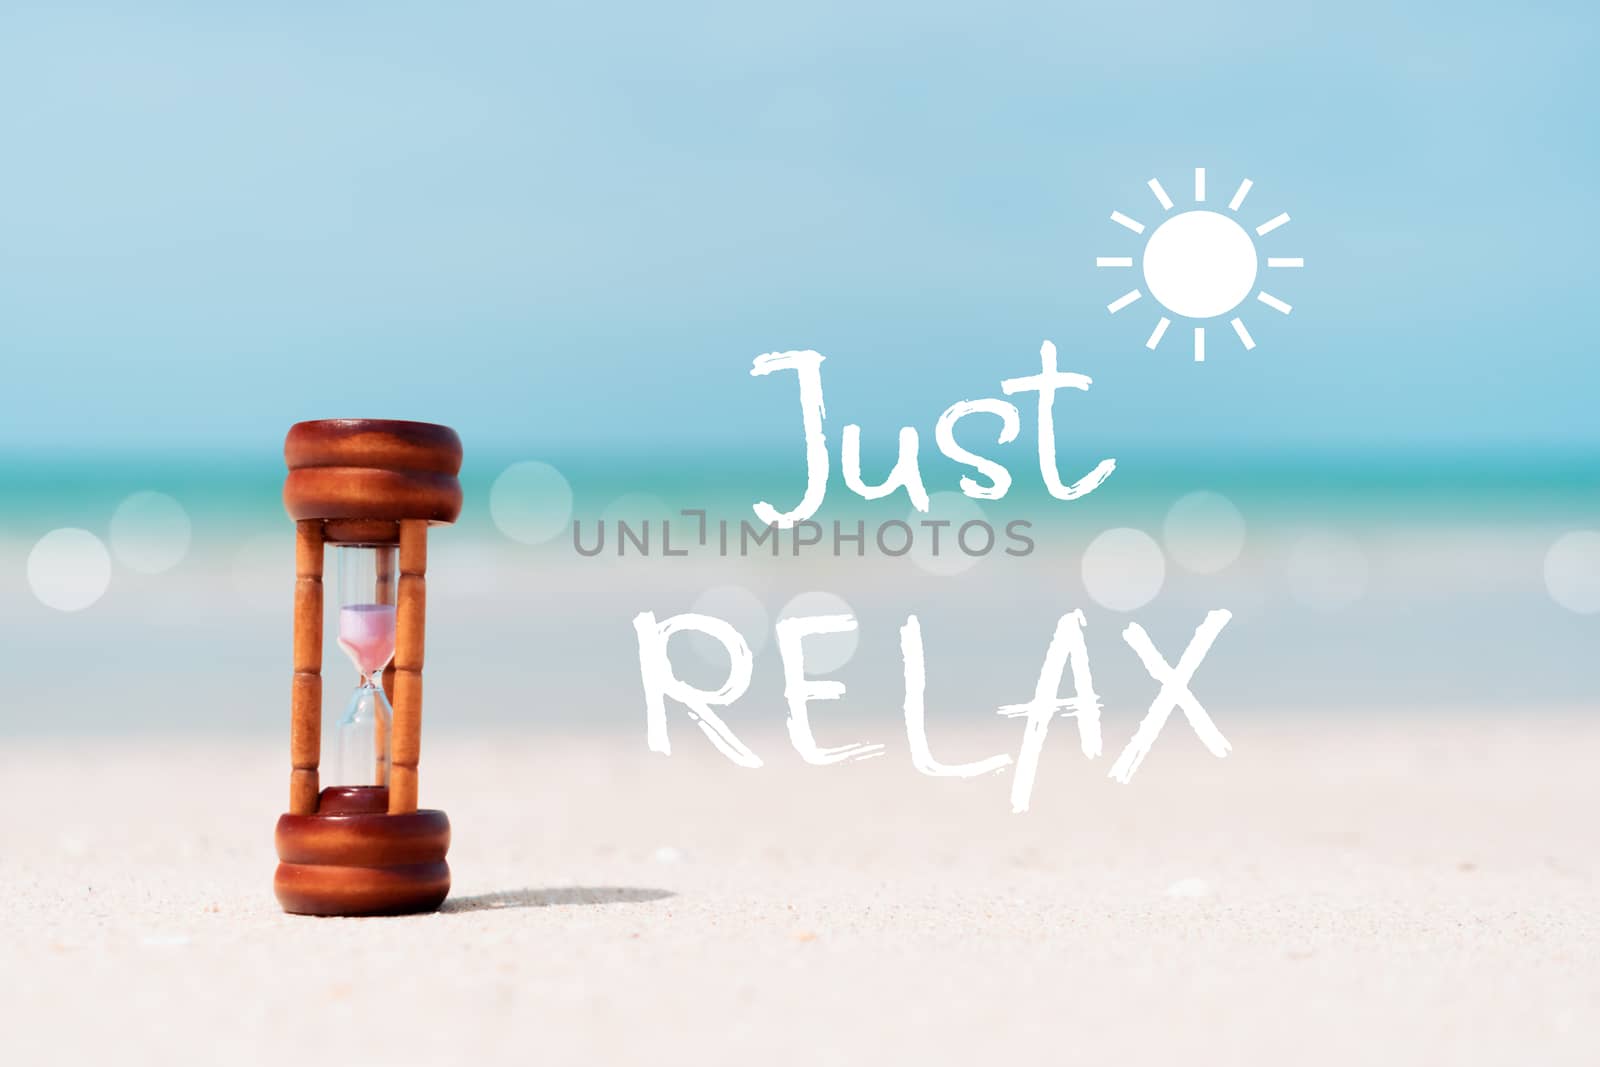 Just relax qoute with hourglass on sand and summer beach blue sky background. Time to travel tourism season concept background.